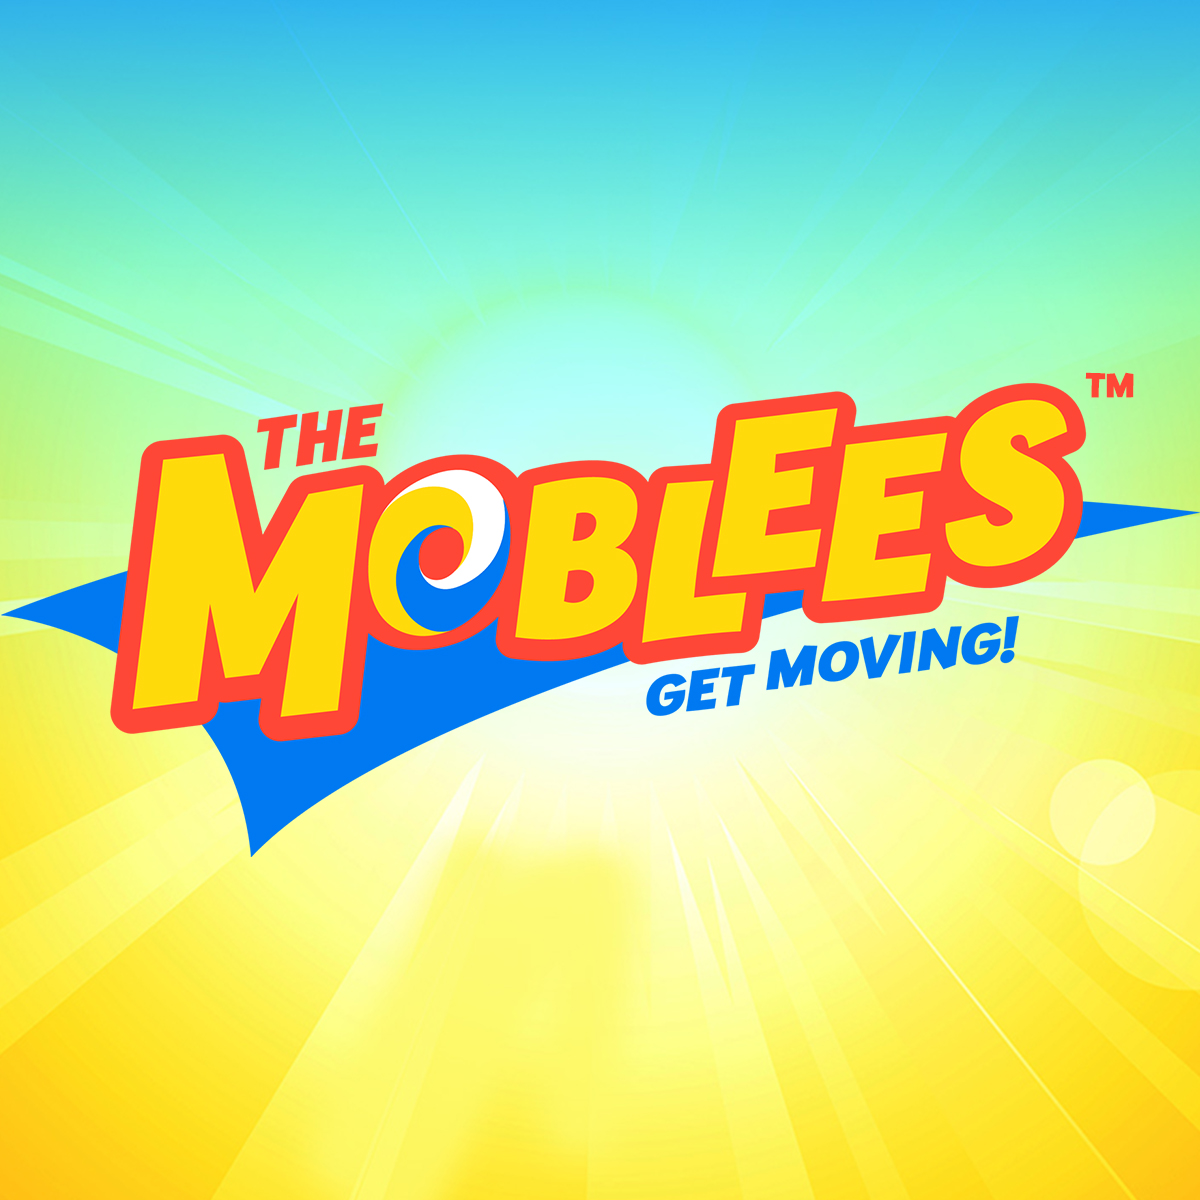 The Moblees: Get Moving!